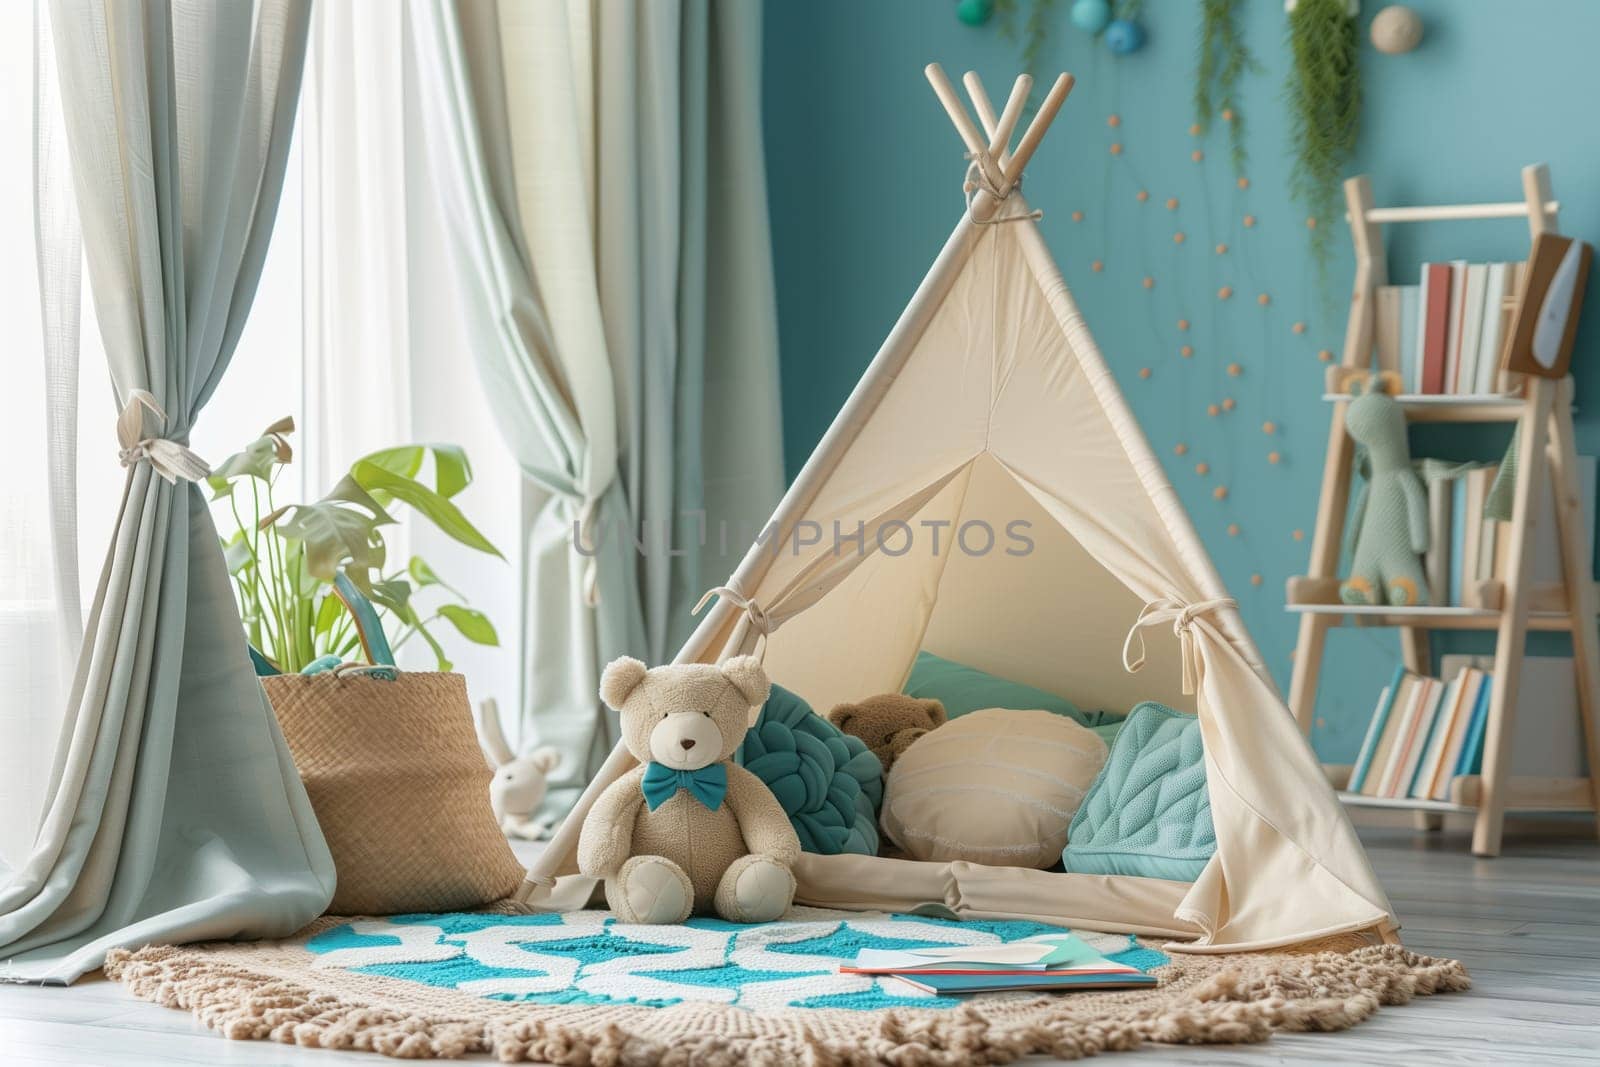 In an Azurecolored room with wooden interior design, a teepee stands with a teddy bear inside, surrounded by plants and curtains for comfort and leisure